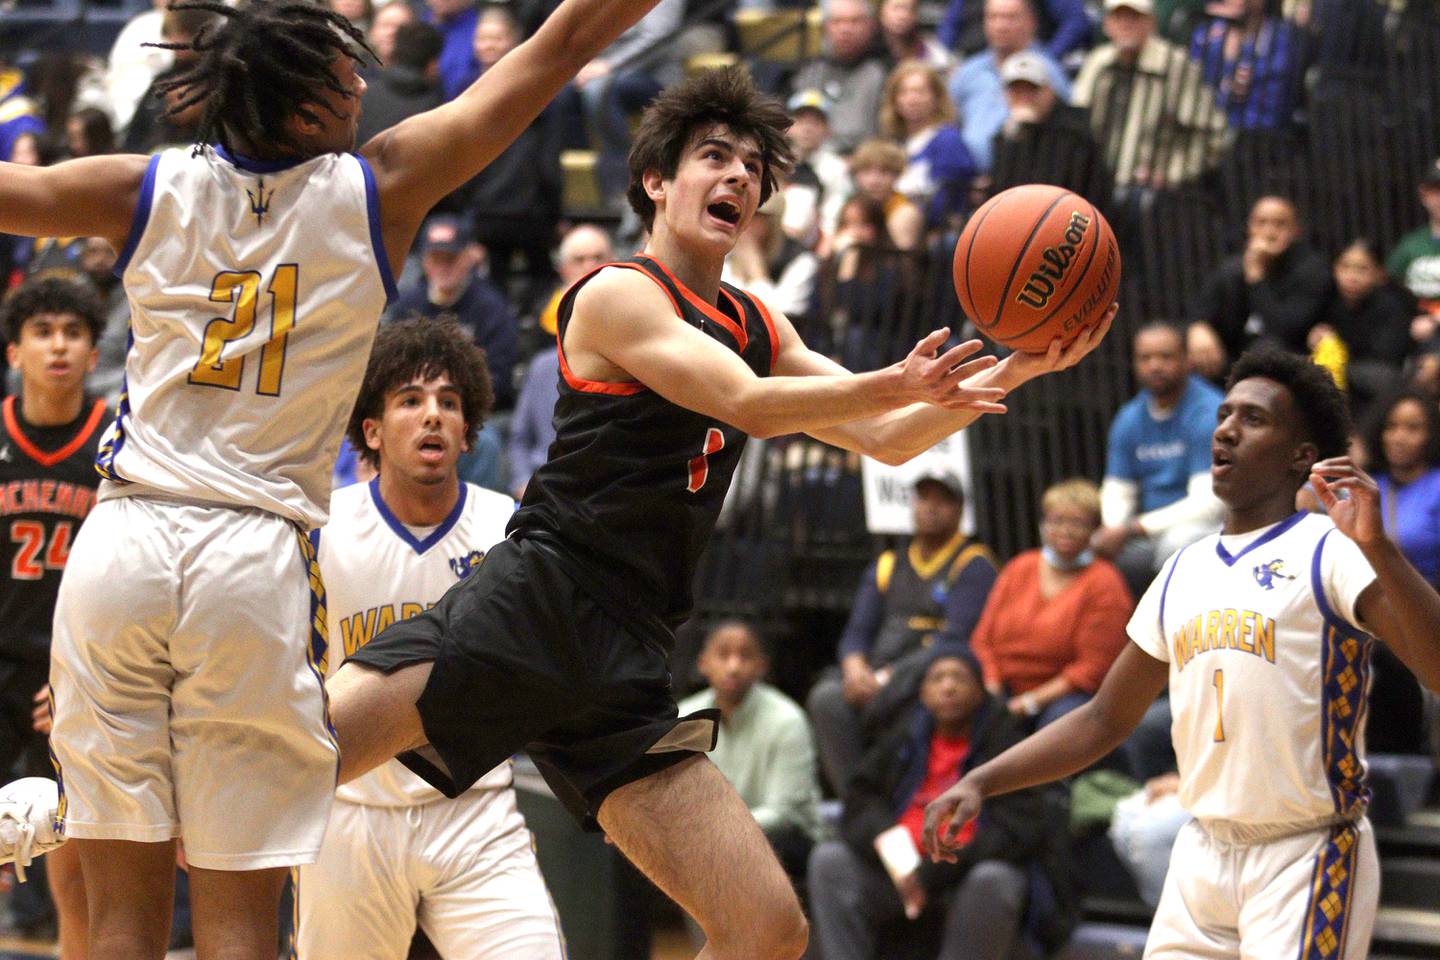 McHenry’s Marko Visnjevac works under the hoop against Warren during IHSA Class 4A Sectional Final action at Rock Valley College on Friday night.